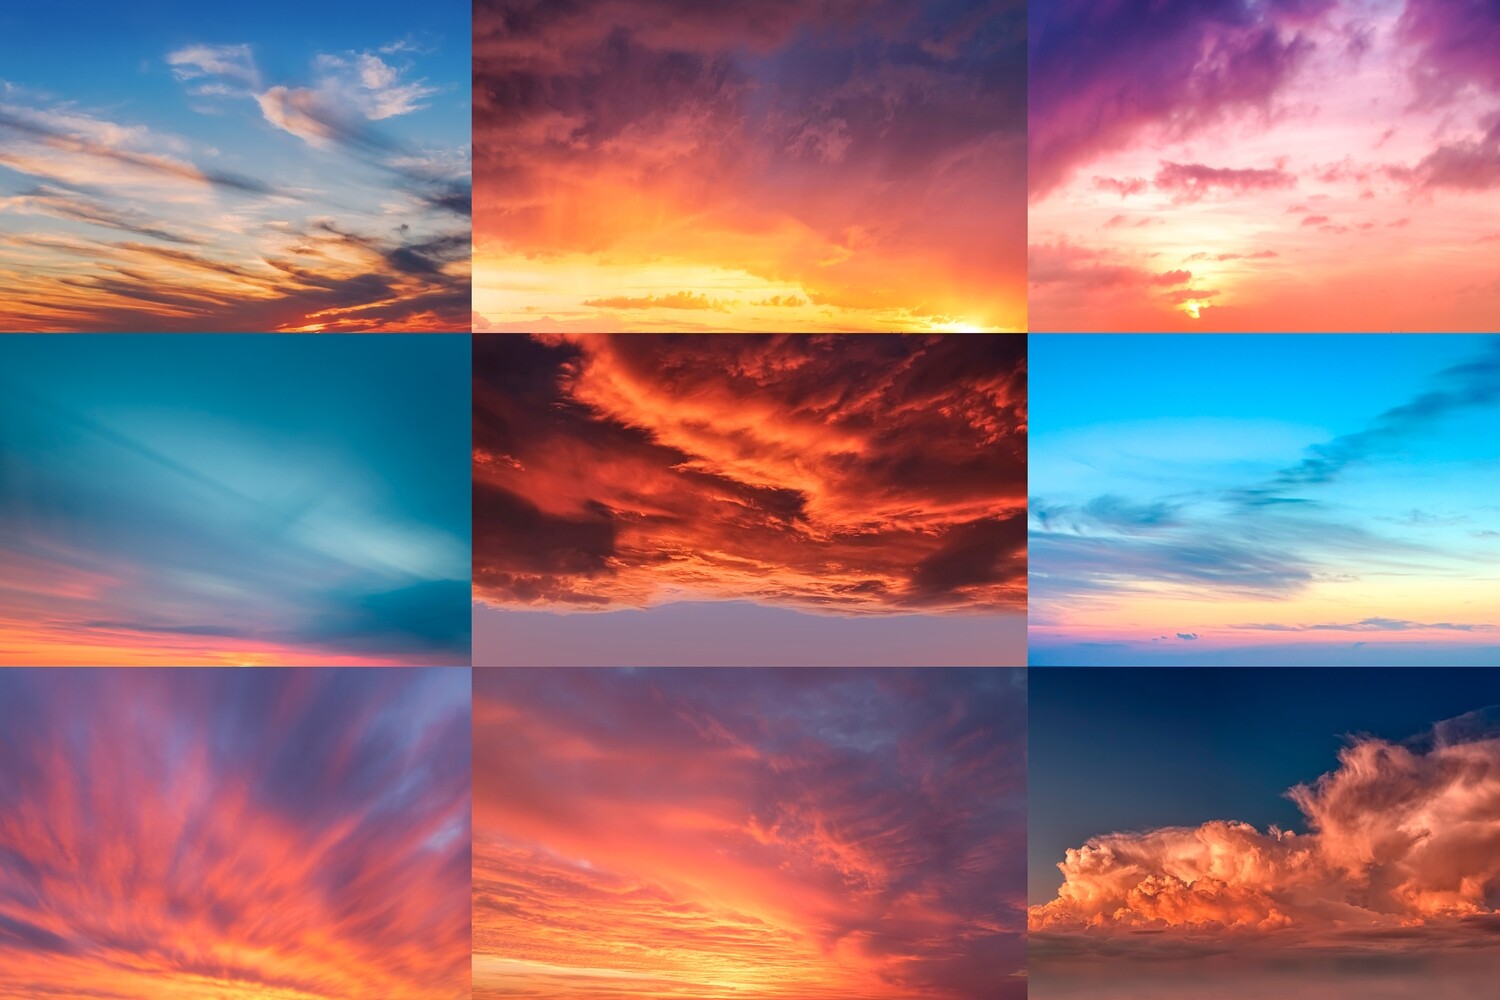 Sunrise-Sunset Sky Replacement Pack